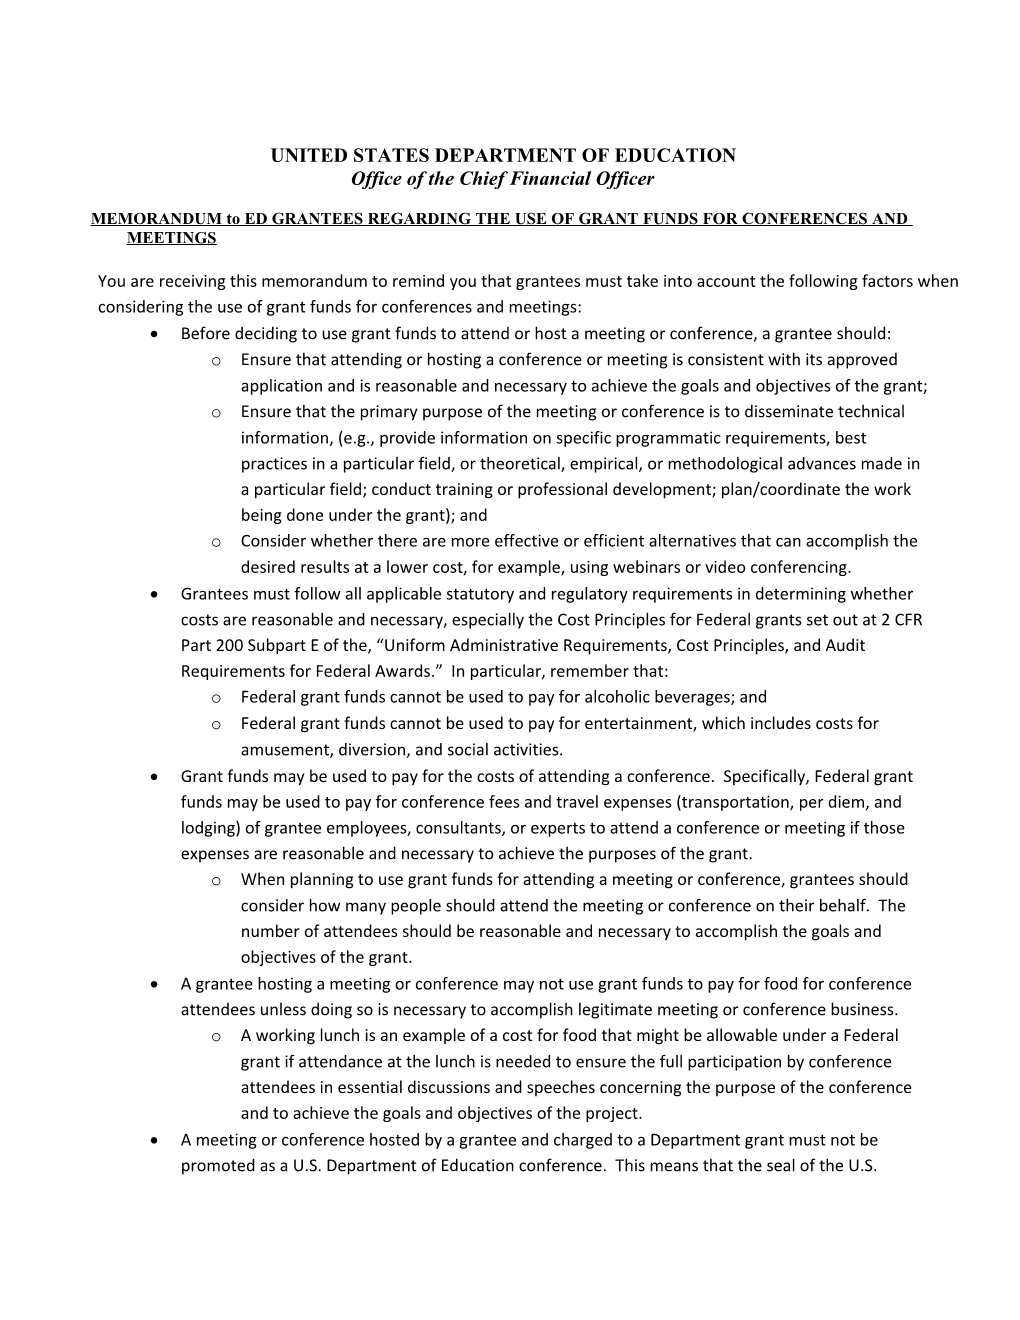 U.S. Department of Education, Office of the Chief Financial Officer: Memorandum to ED Grantees